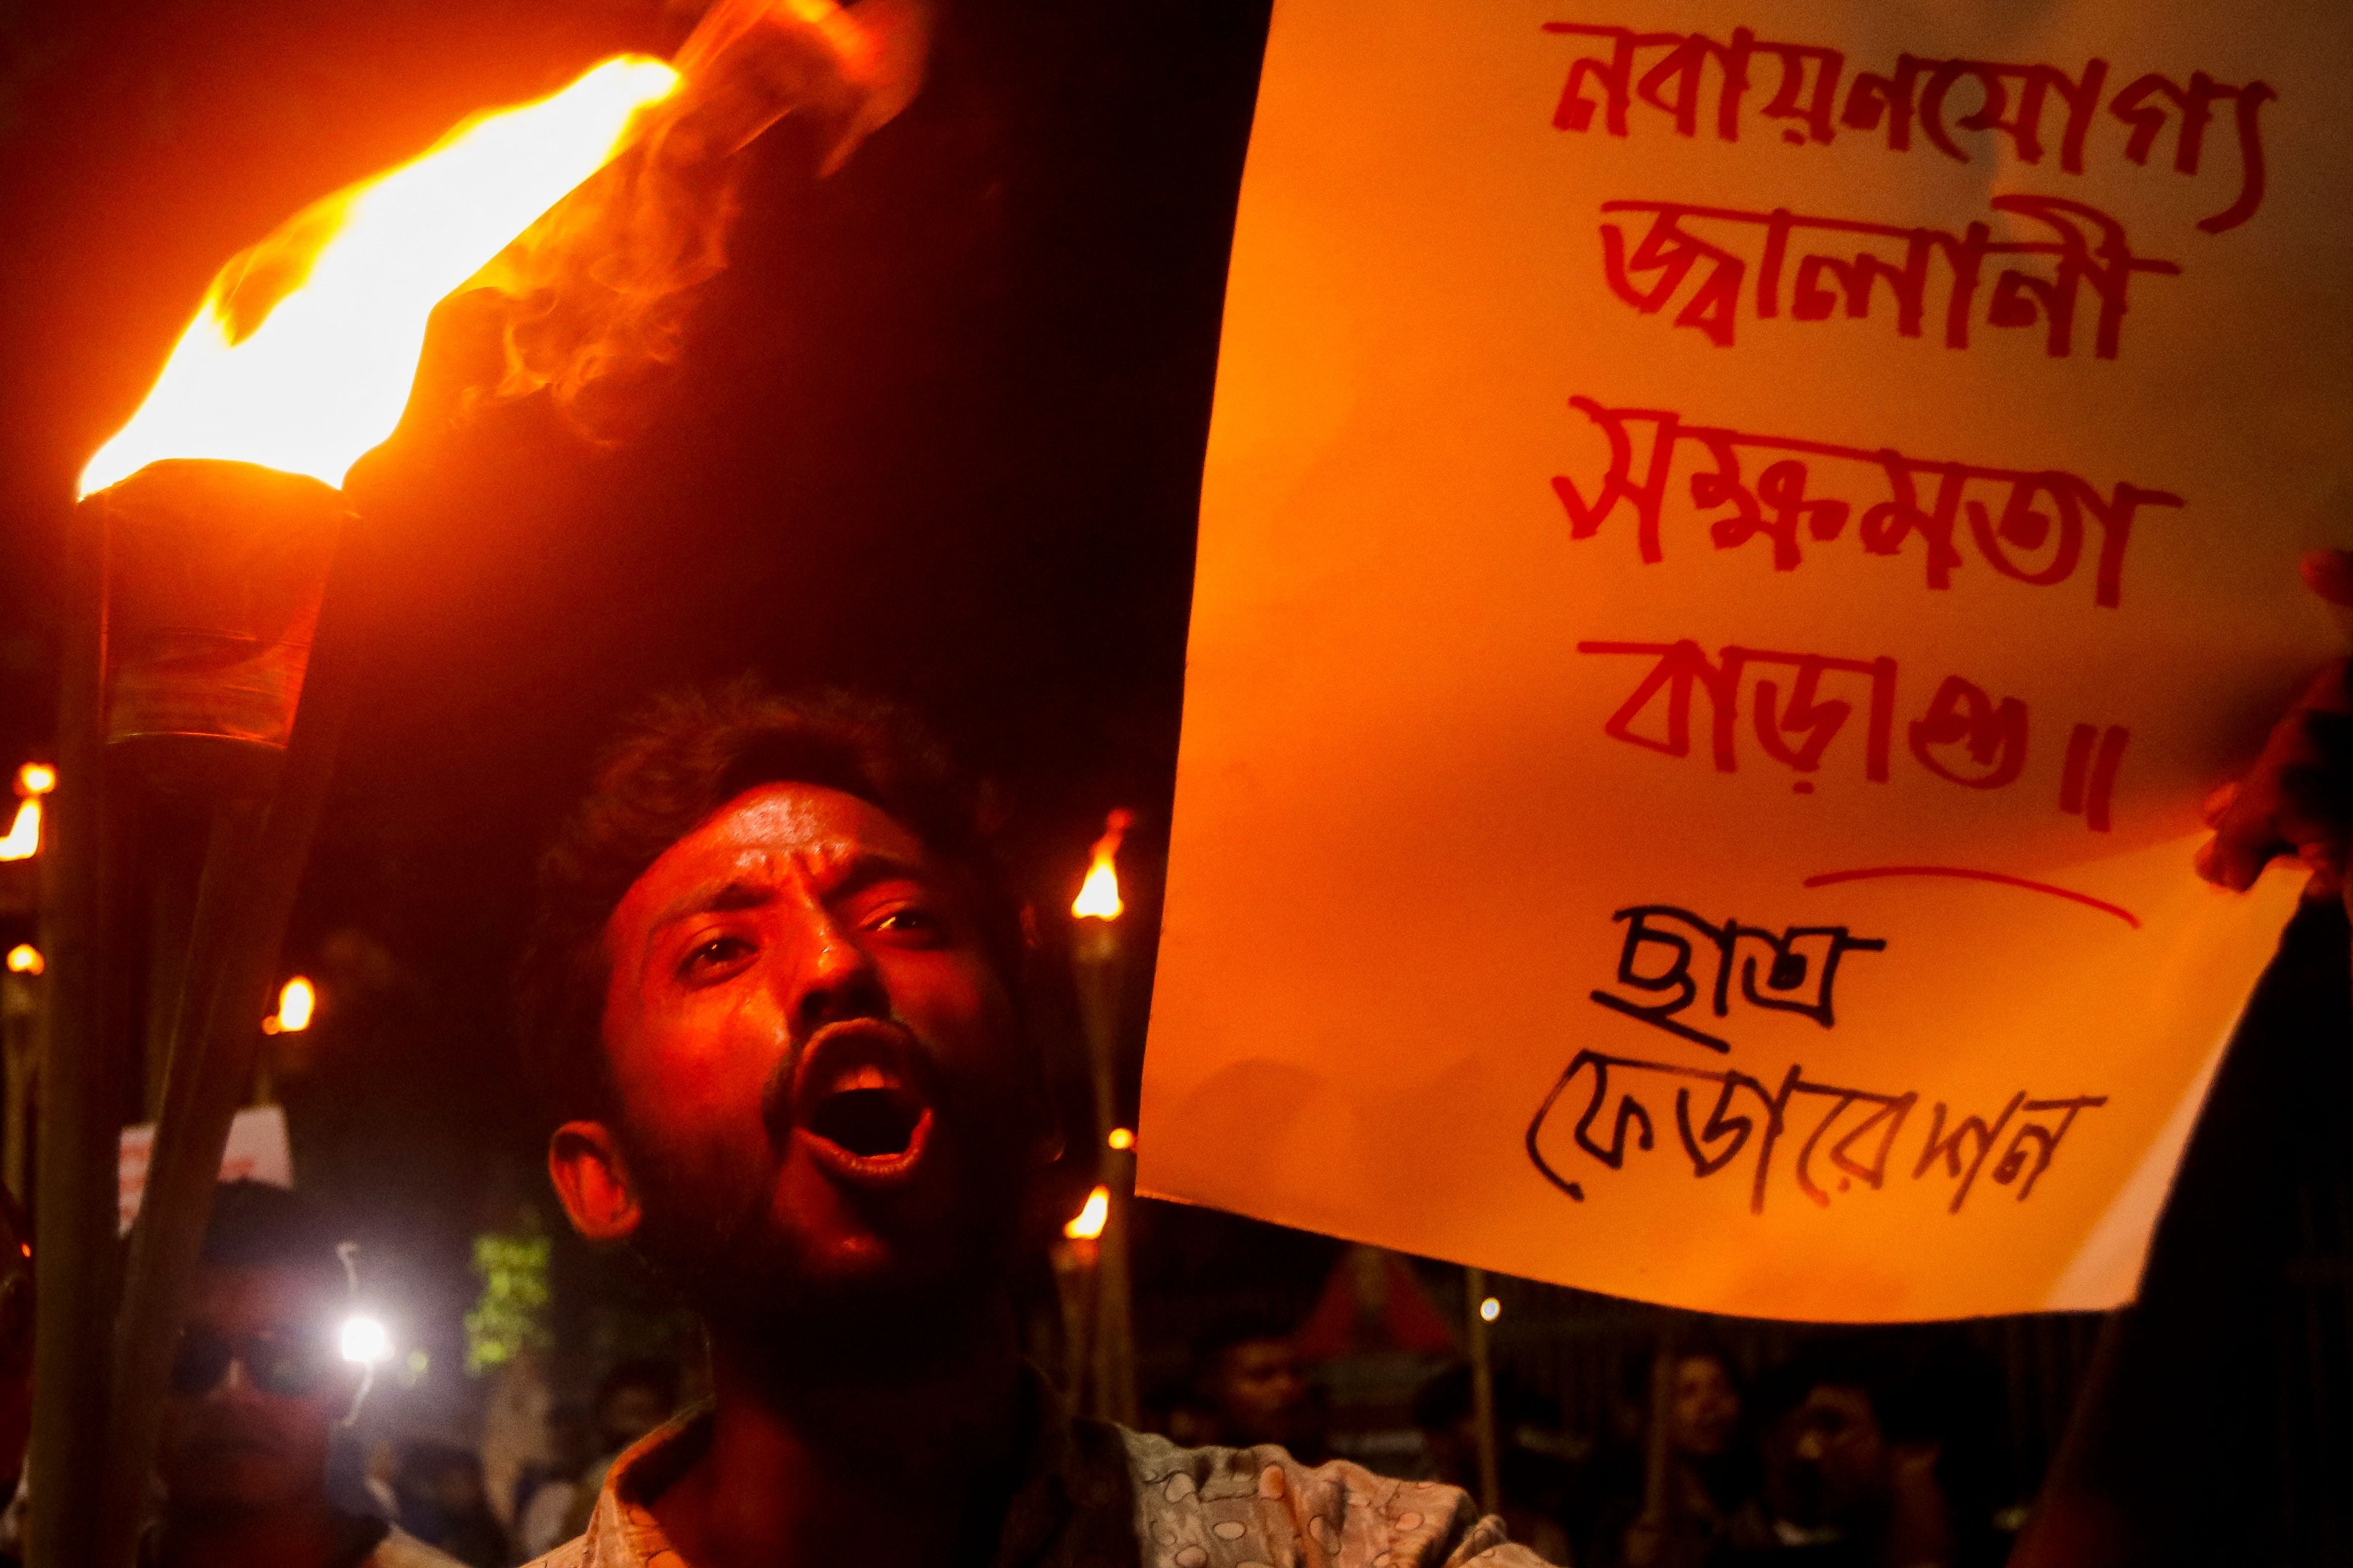 An activist displays a banner and shout slogans during a torch rally to protest against rising fuel prices in Dhaka